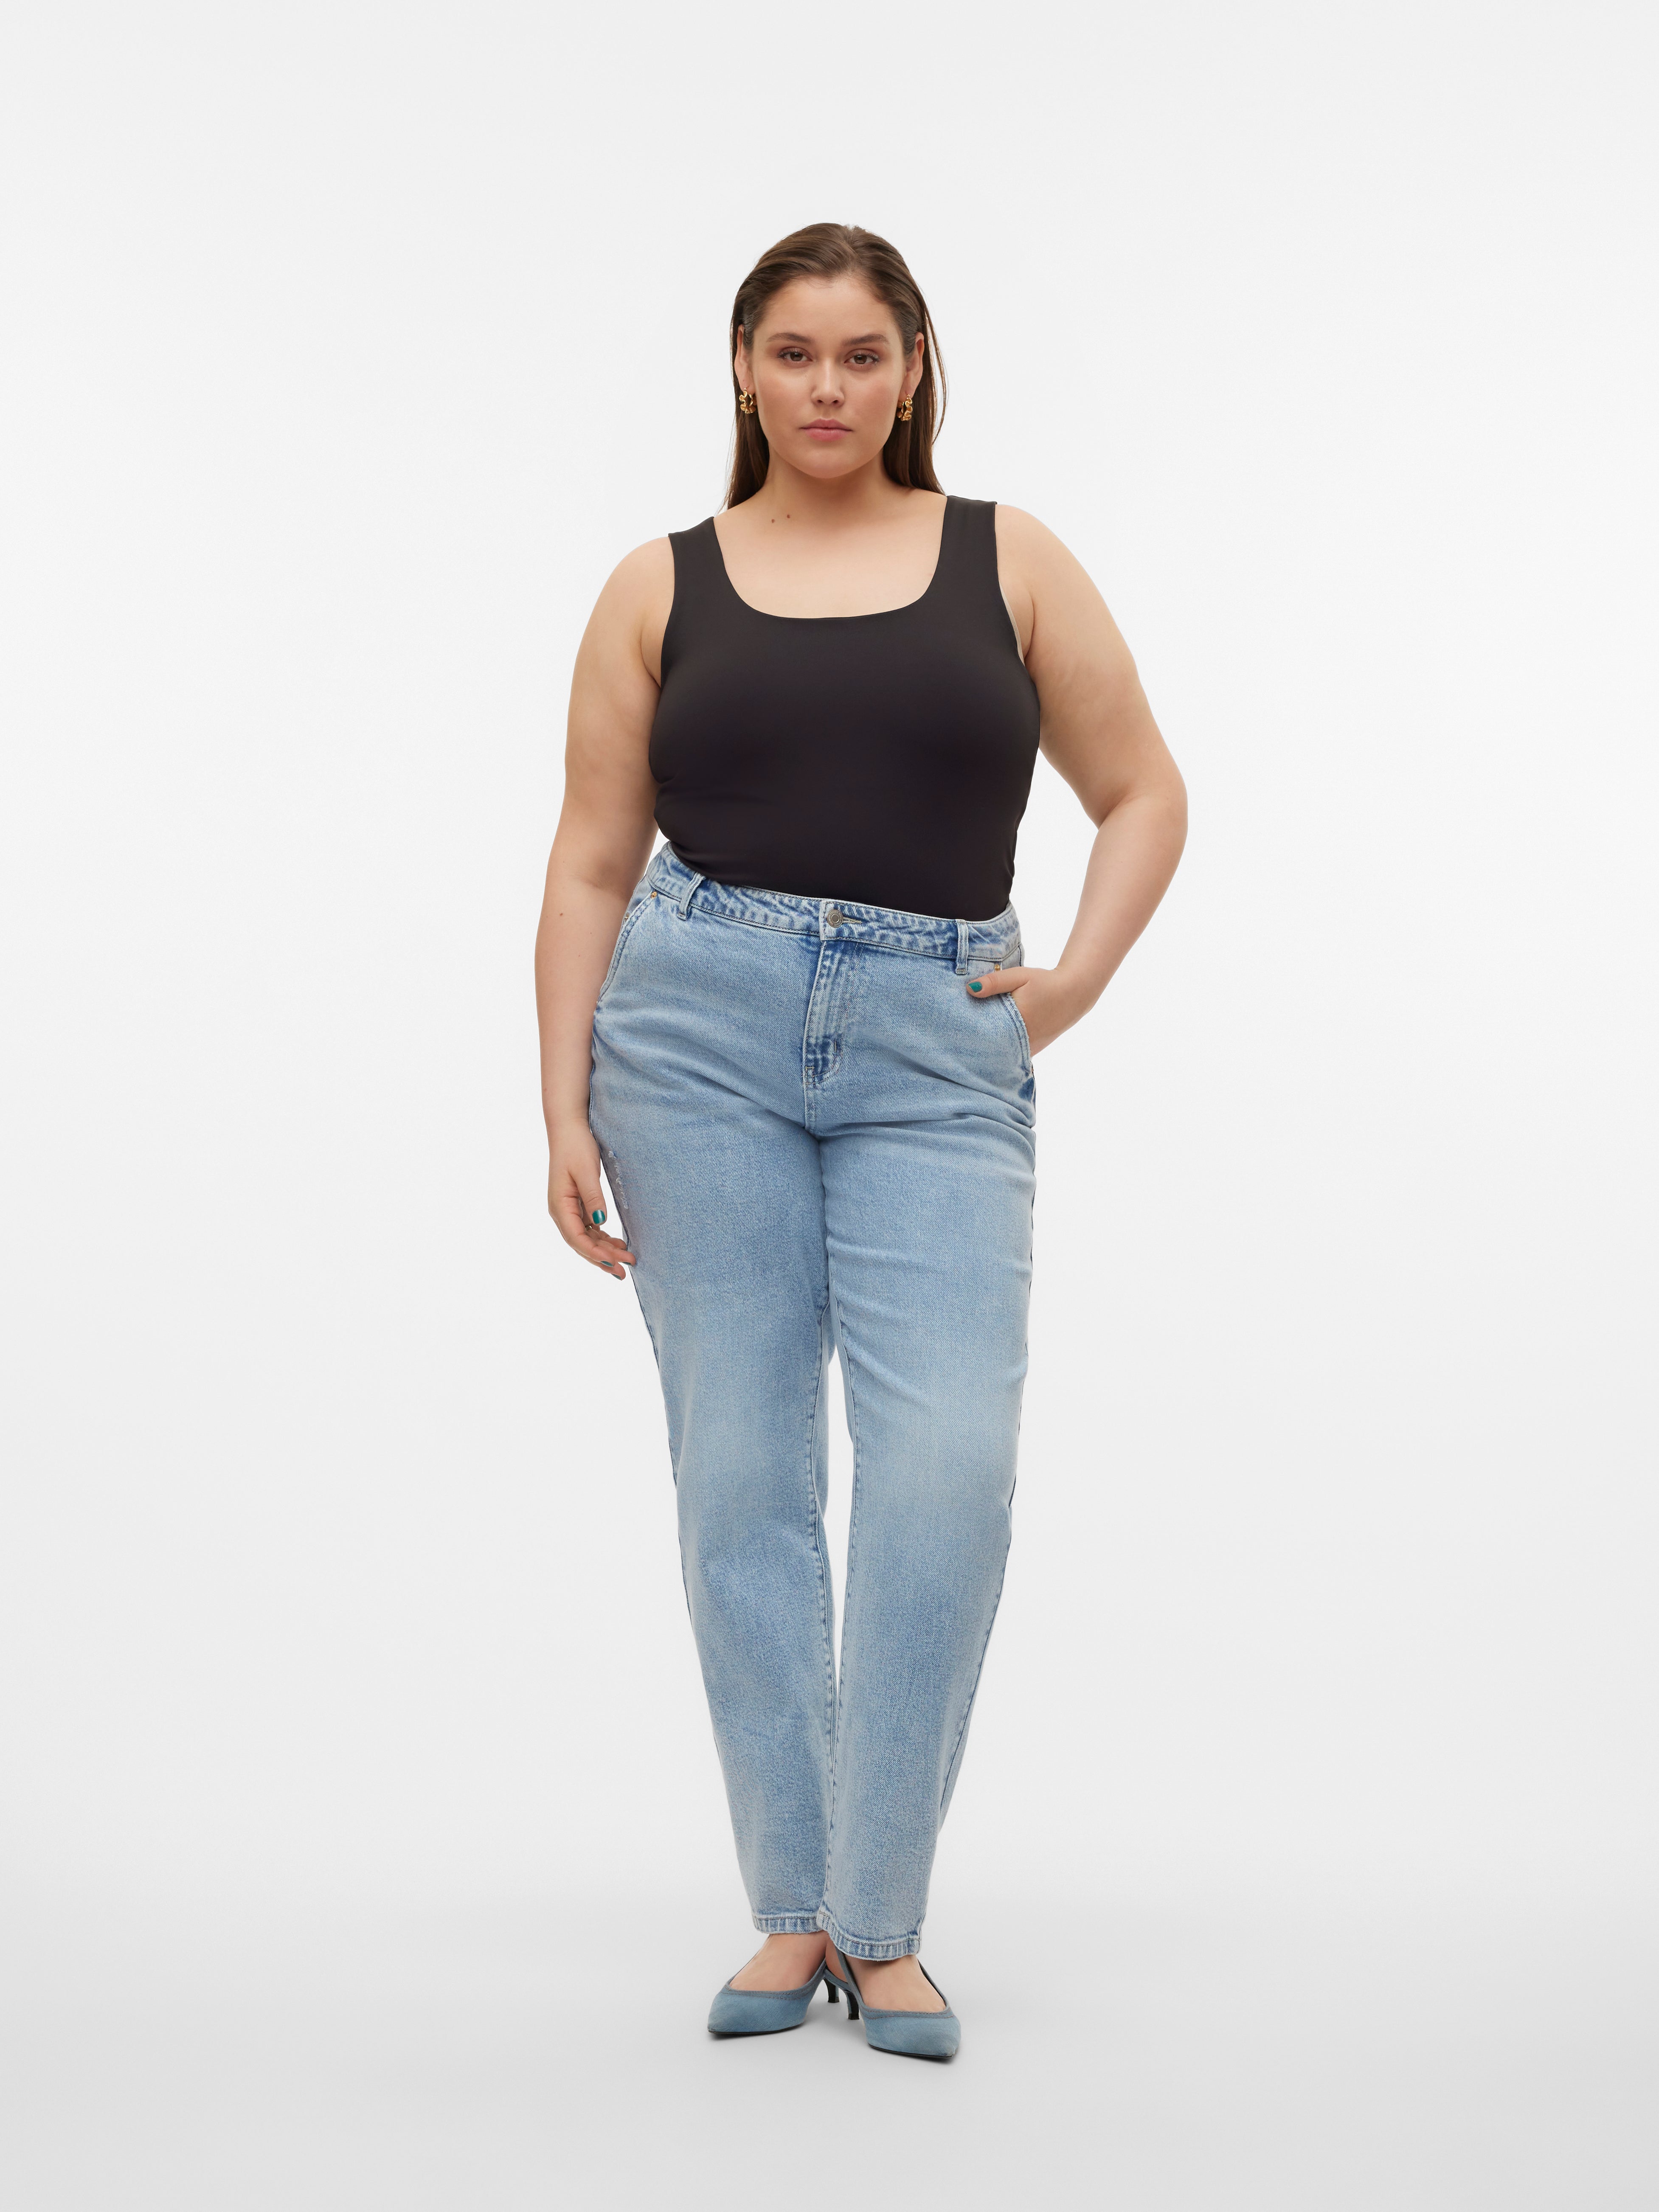 VMCISA Hohe Taille Hohe Taille Jeans